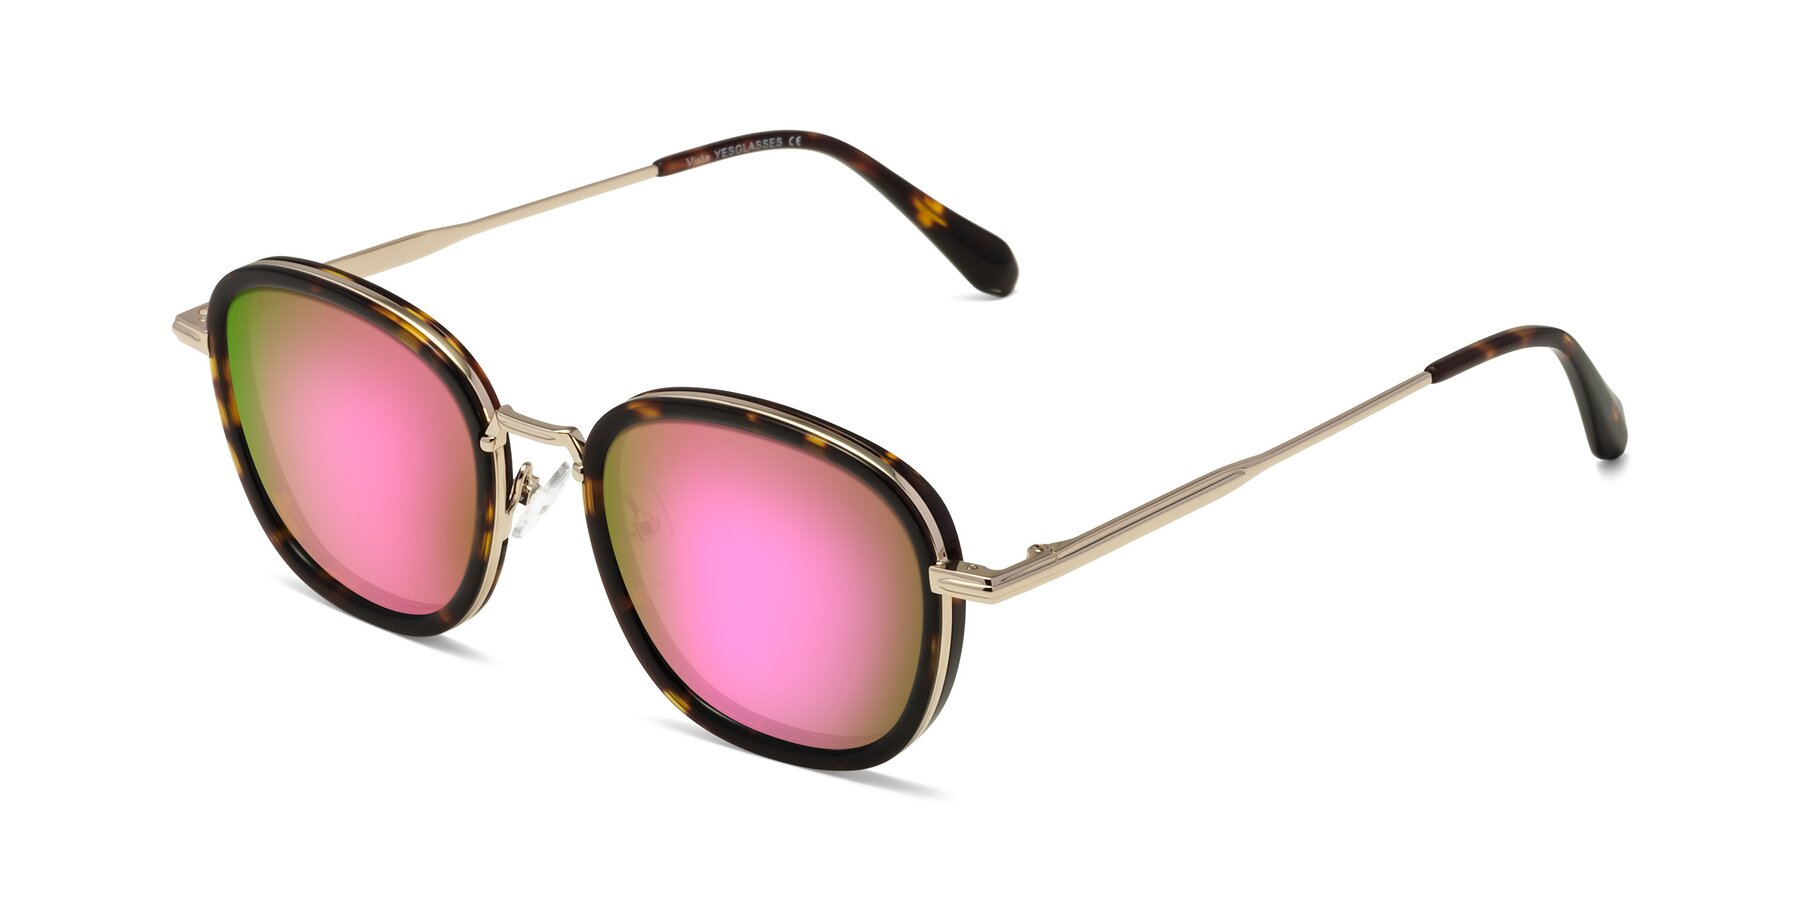 Angle of Vista in Tortoise-Light Gold with Pink Mirrored Lenses